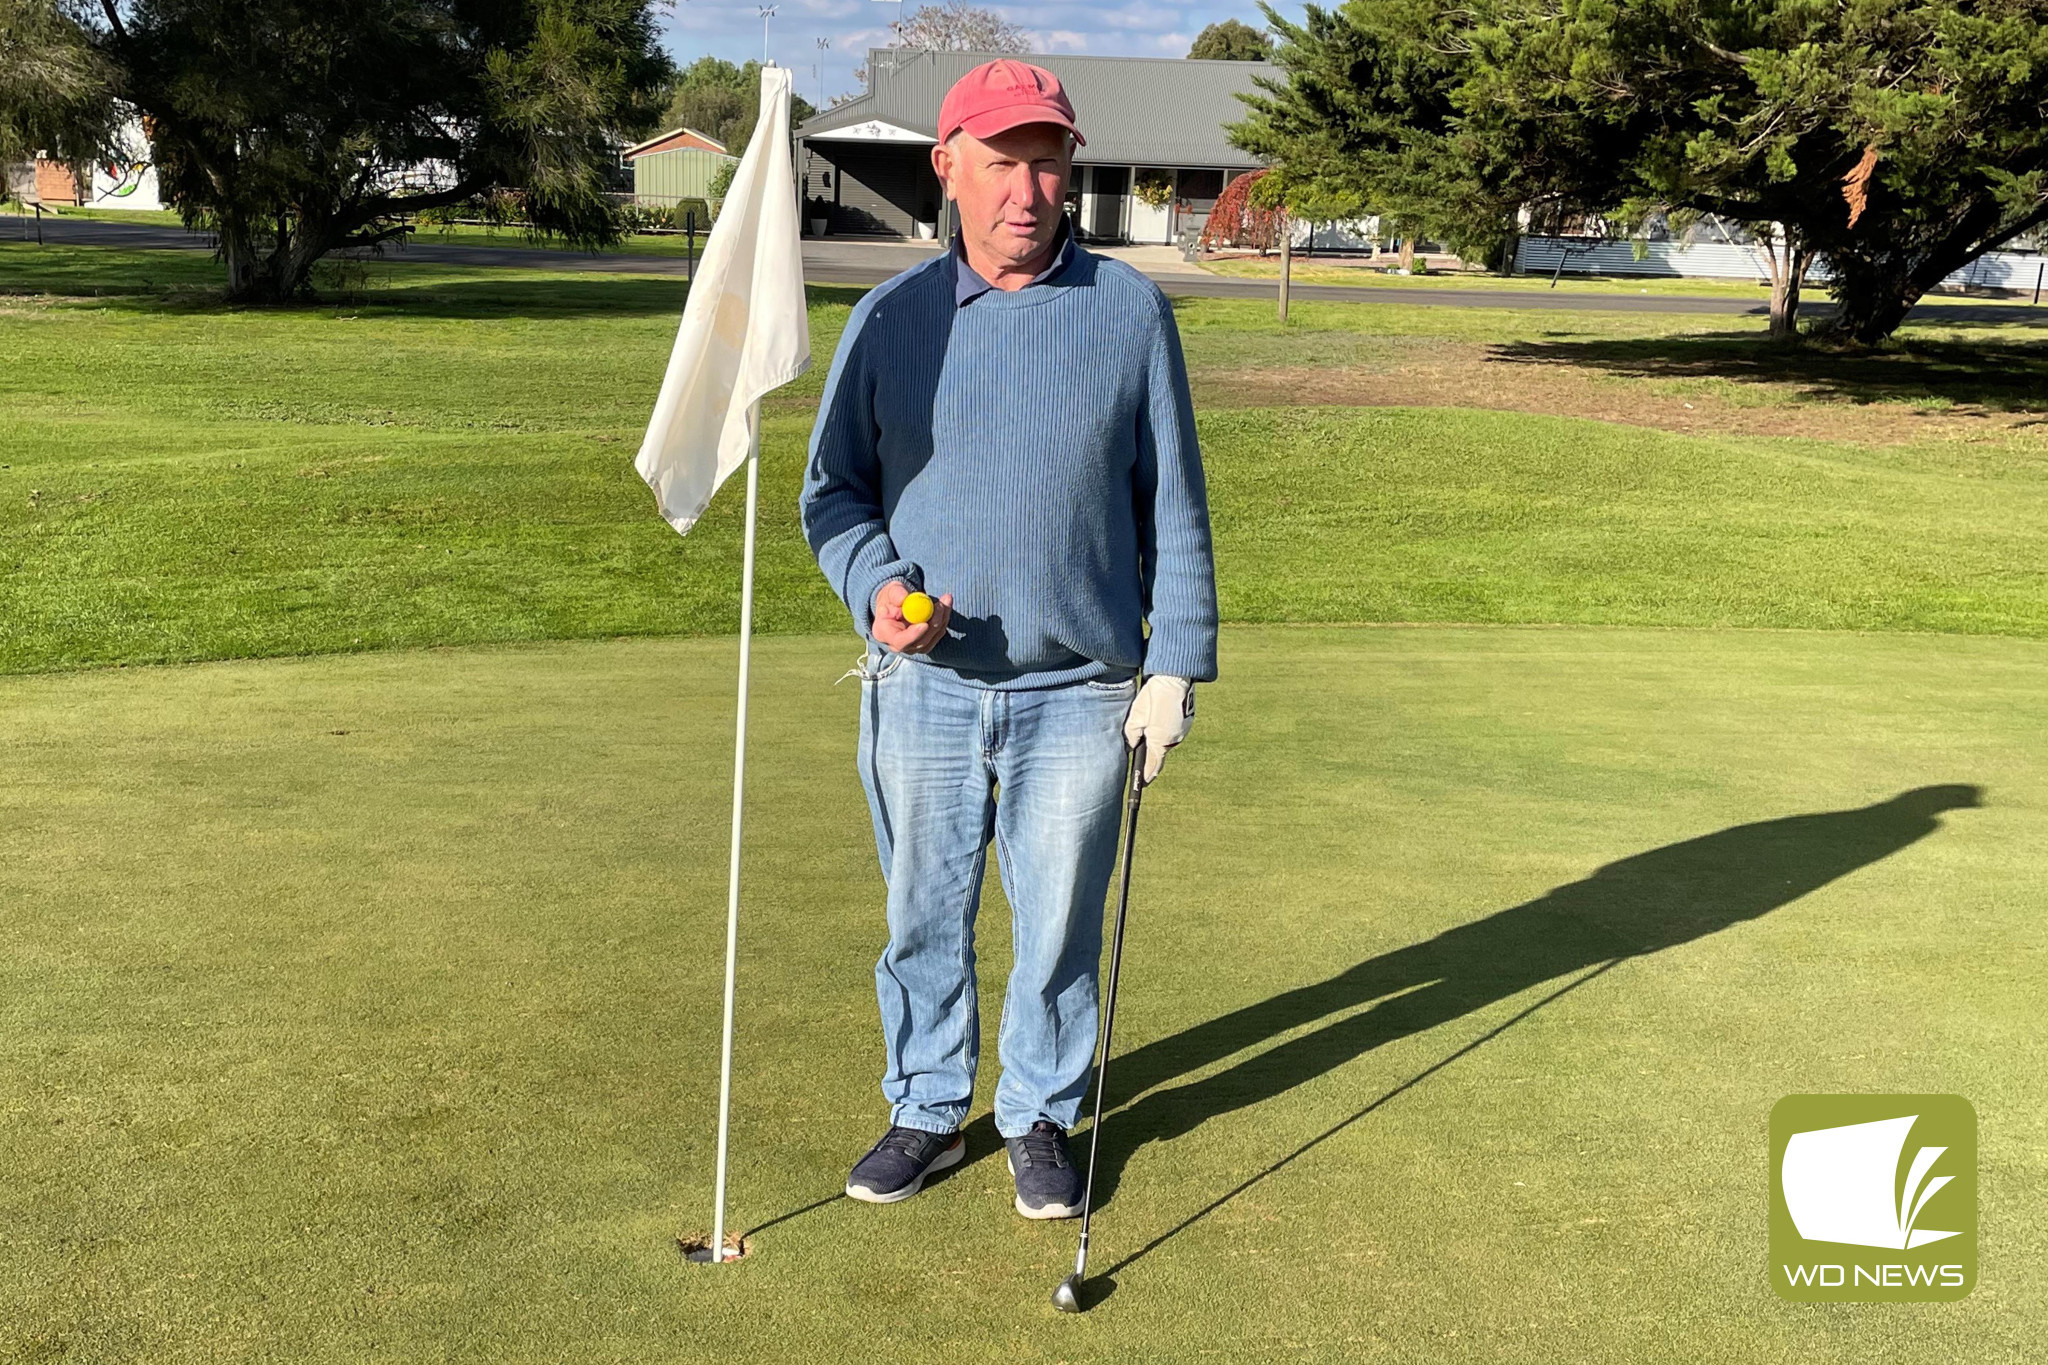 Tony McLennan got a Hole in One in Mortlake on Sunday, taking home a $500 sponsors prize.